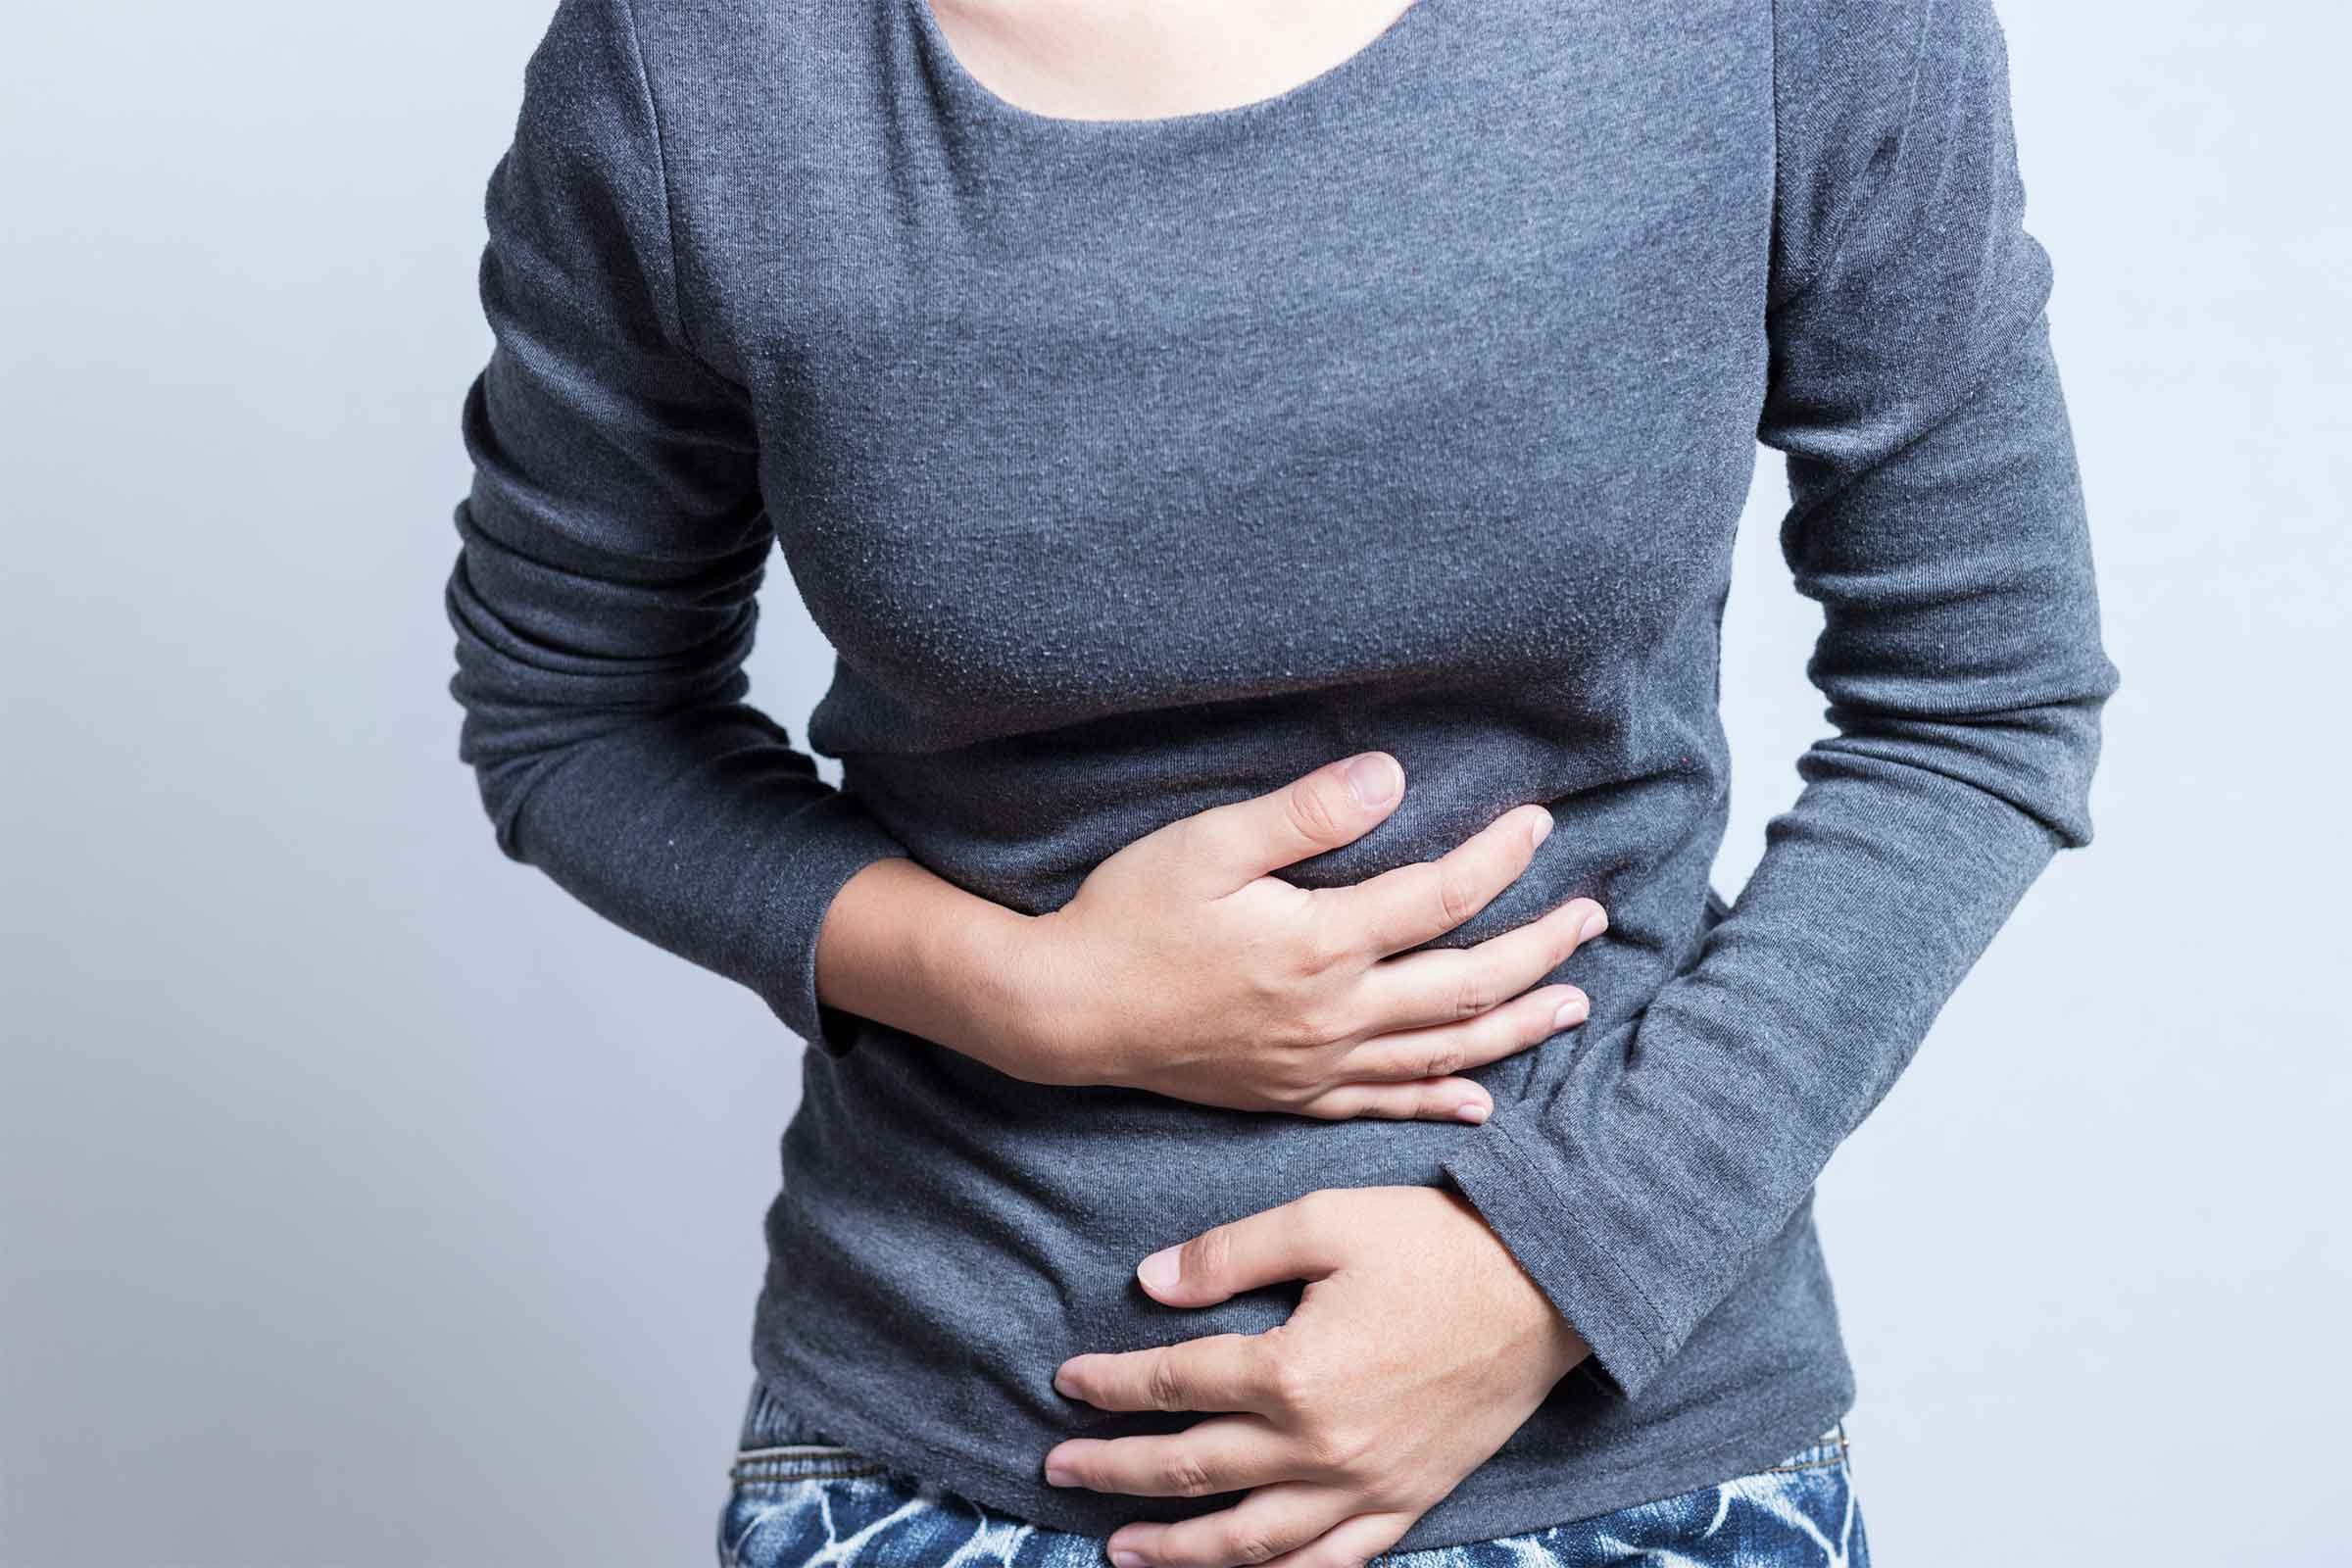 8 Silent Signs You Might Have Diverticulitis